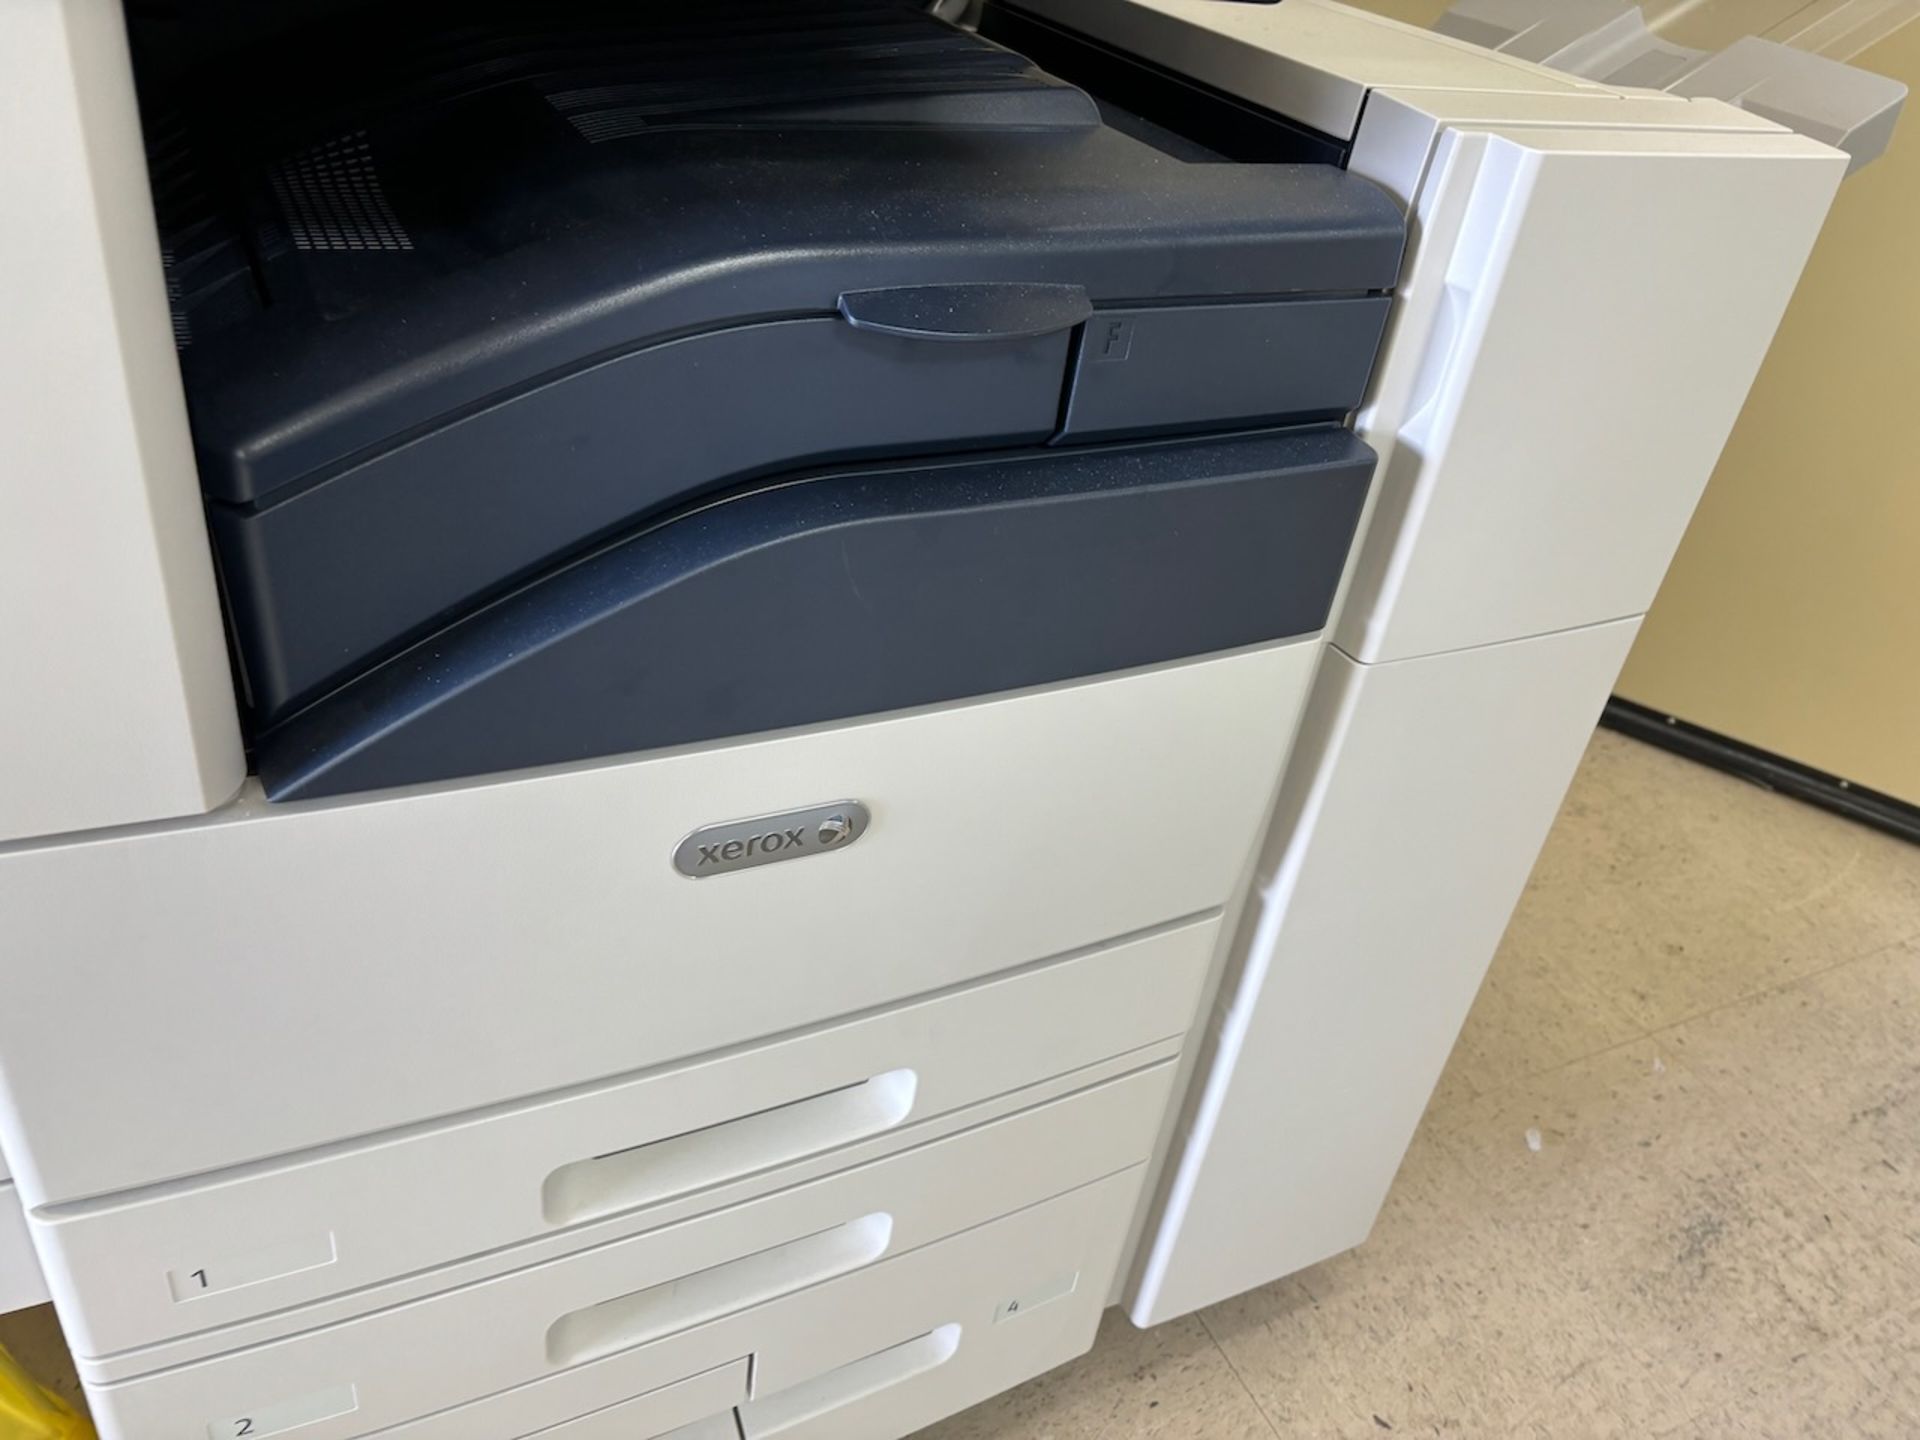 2019 Xerox Multifunction Color Printer - See Auctioneers Note - Image 2 of 5